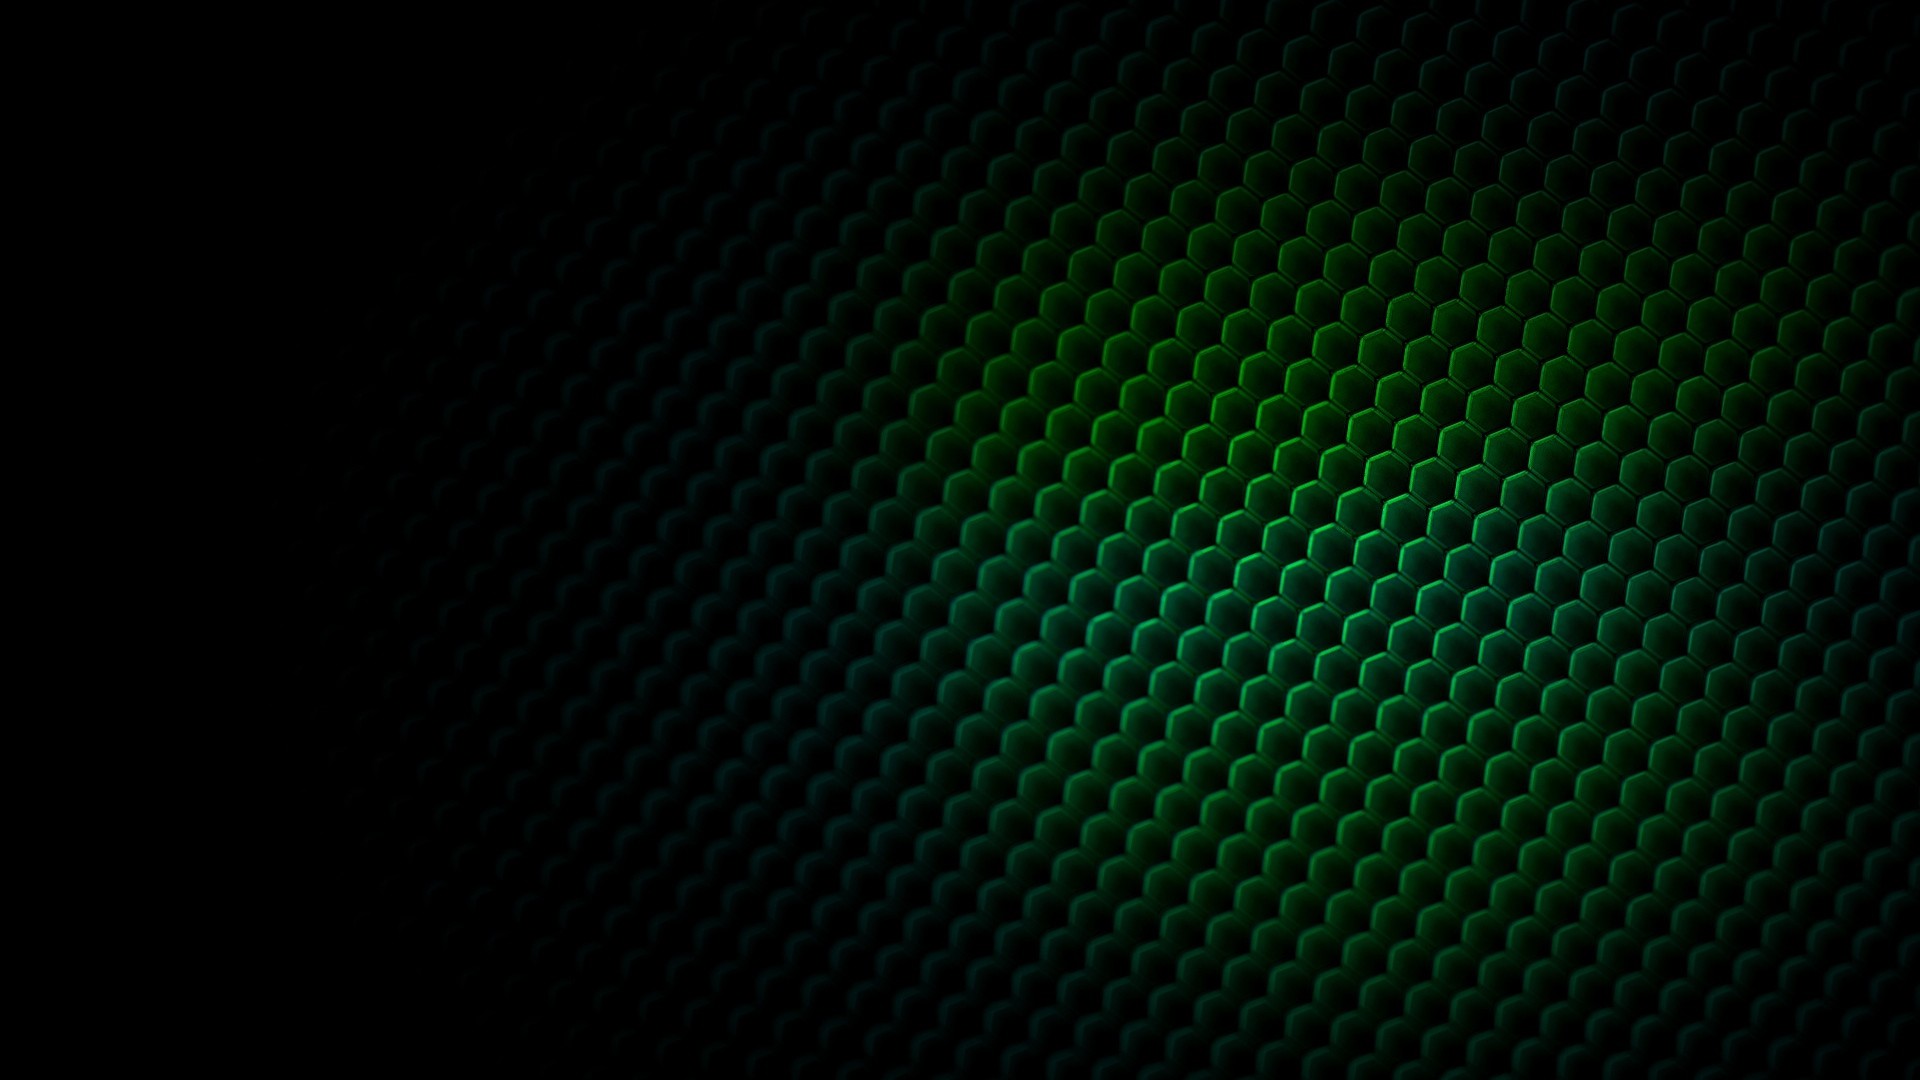 1920x1080 Green and Black Abstract Wallpaper Black And Green Wallpaper Wallpapers)